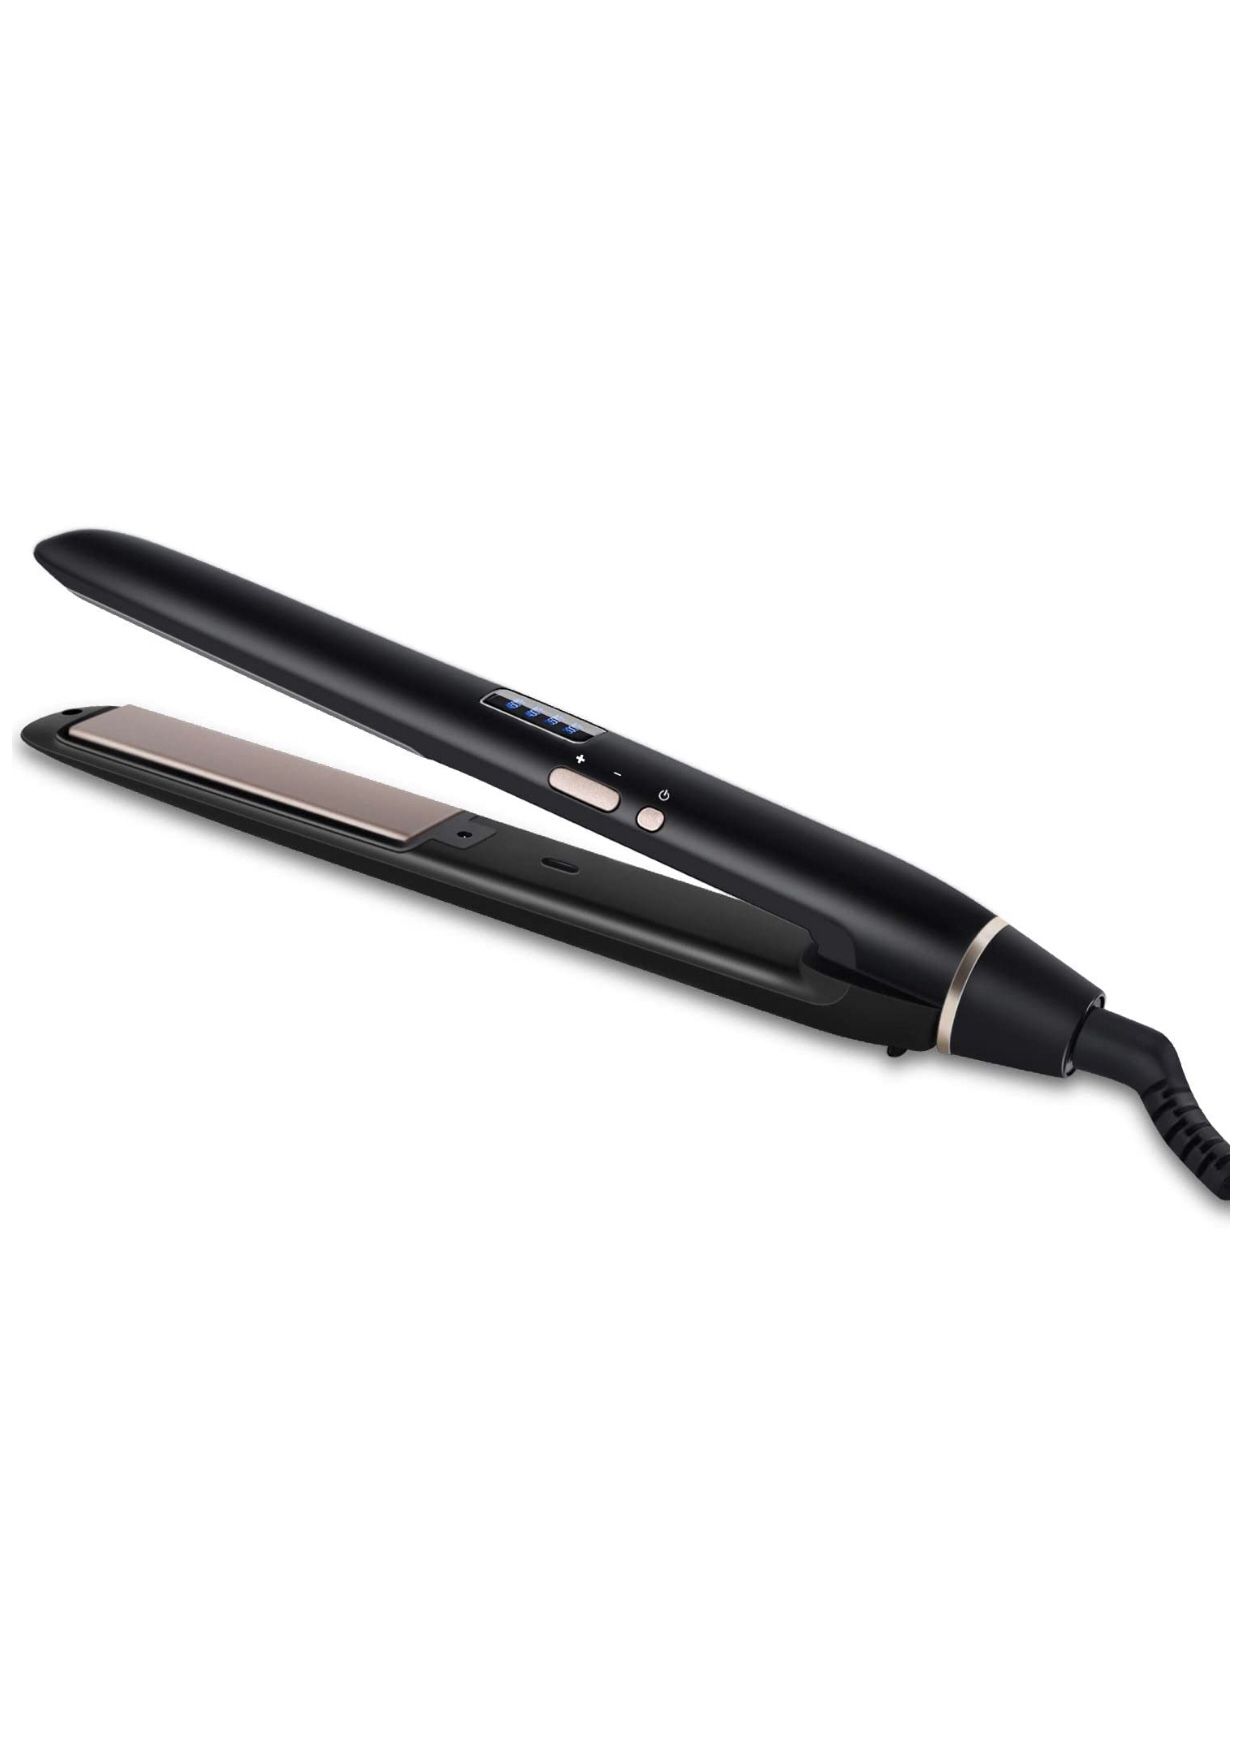 Professional Titanium Flat Iron with Digital LCD Display, Dual Voltage, Instant Heating Hair Straightener for All Hair Type